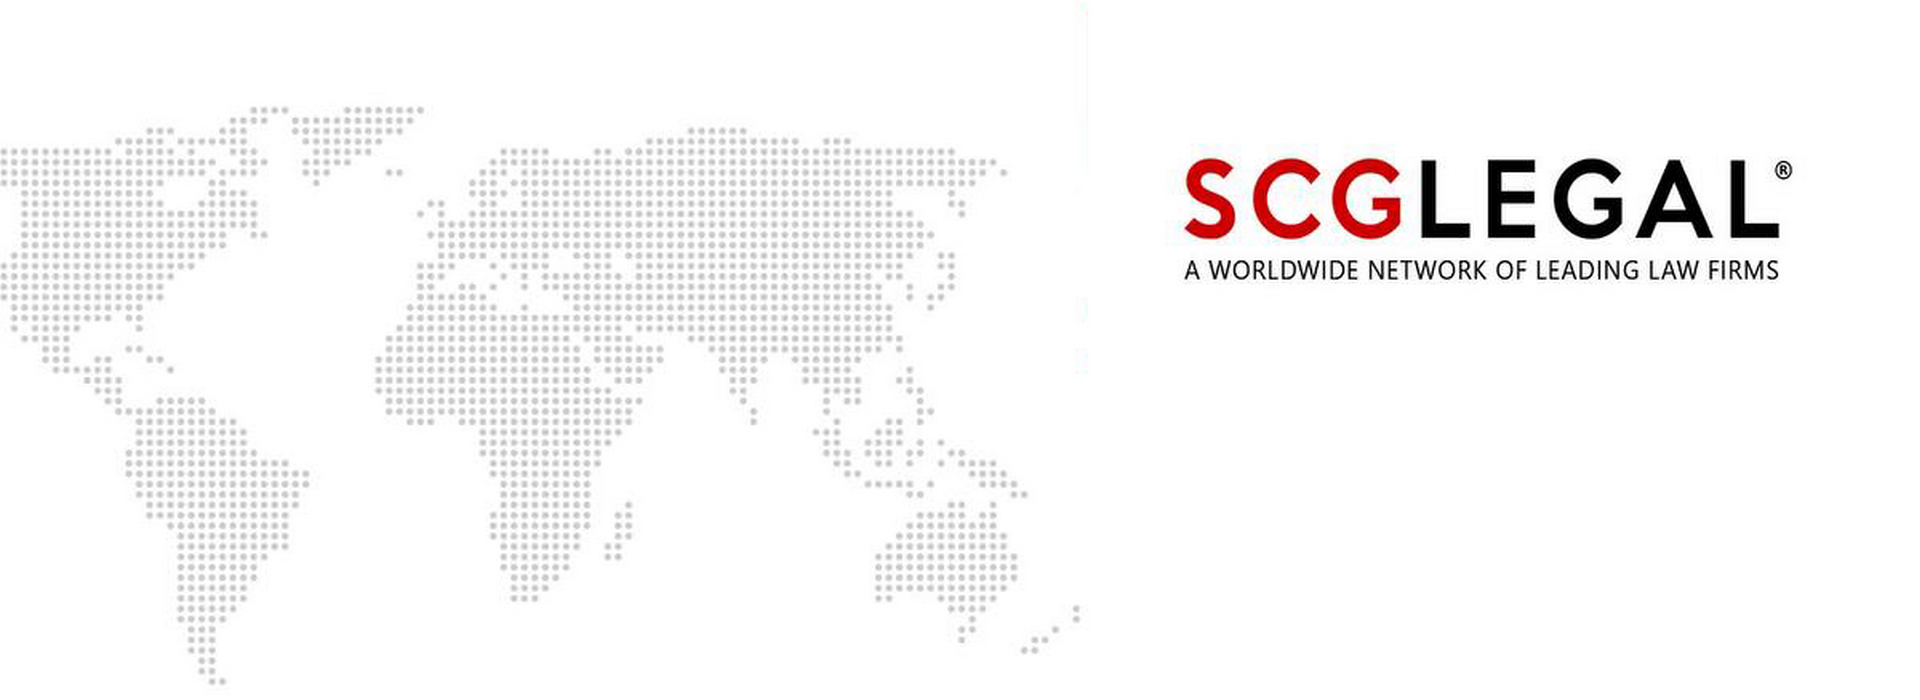 GOLAW Has Become a Member of the Global SCG Legal Network, Which Brings Together the World’s Best Law Firms